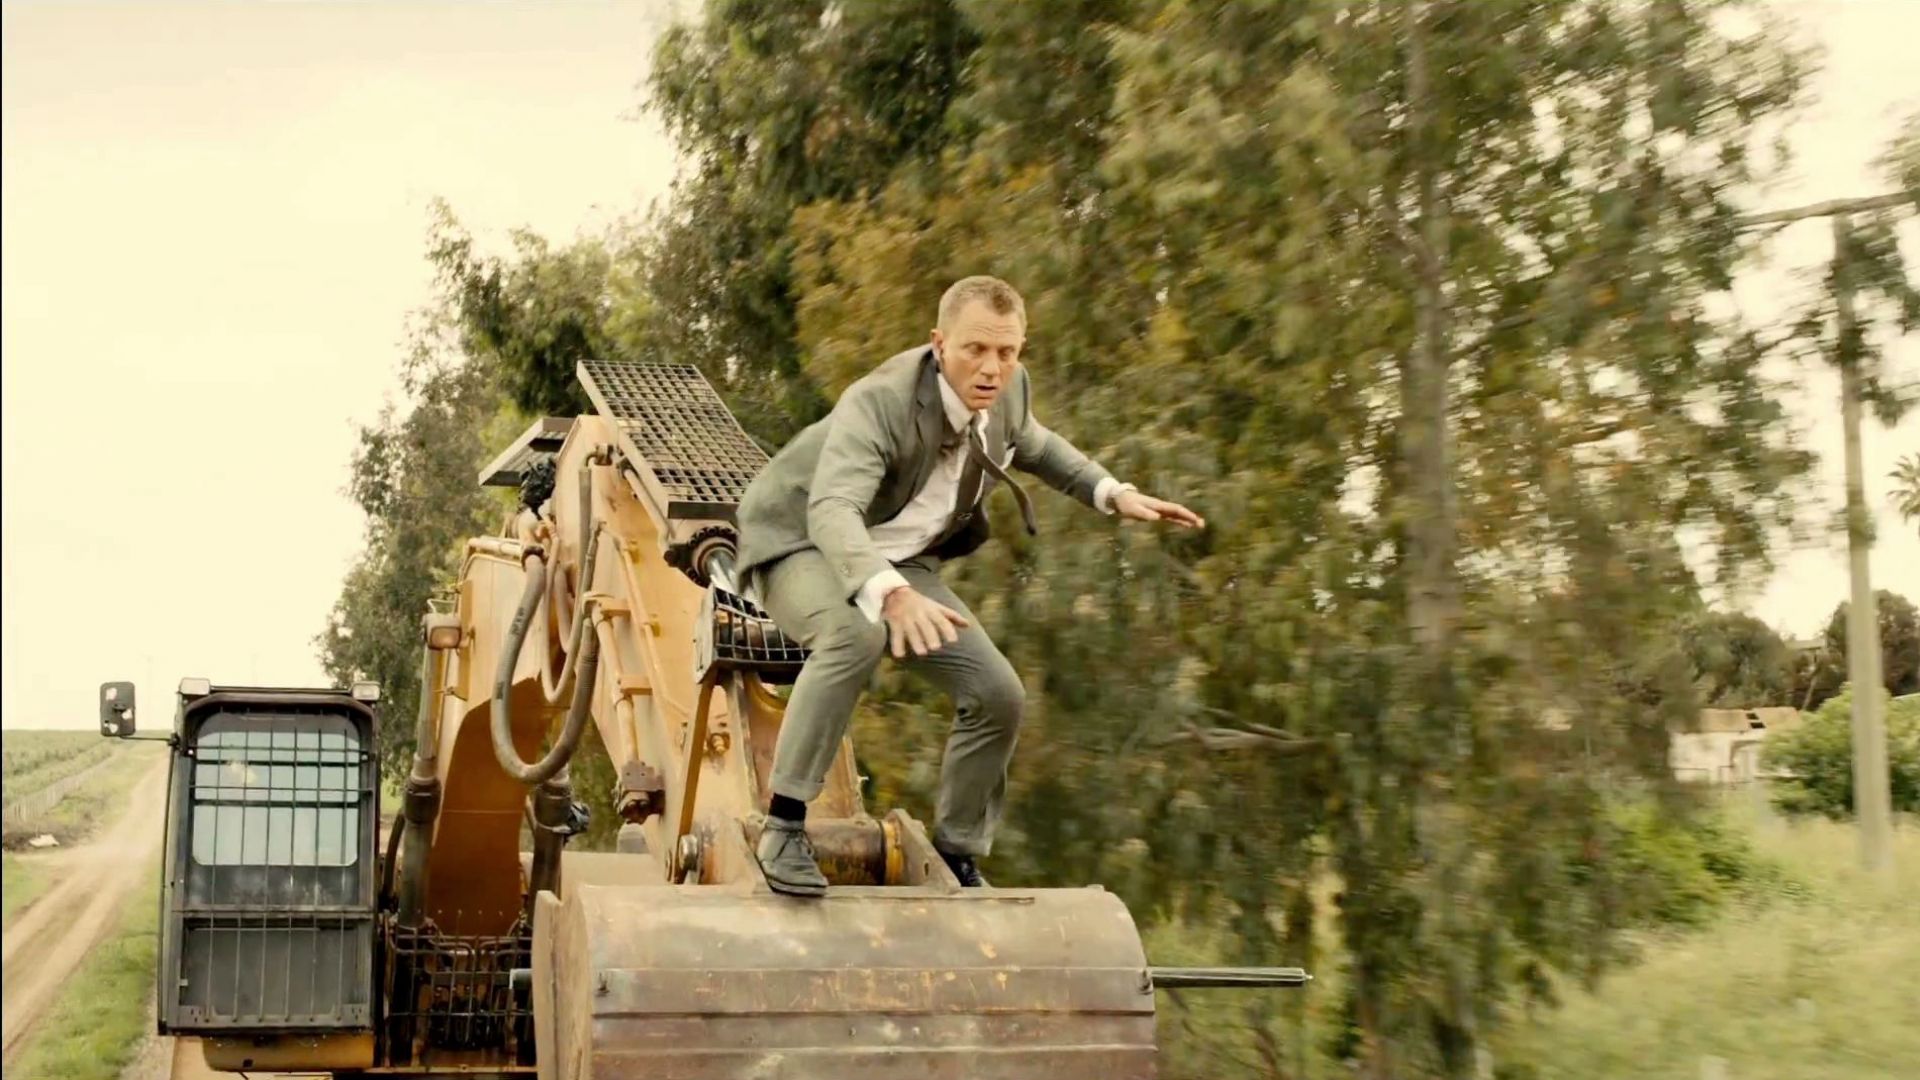 Bond uses excavator to get into train in Skyfall